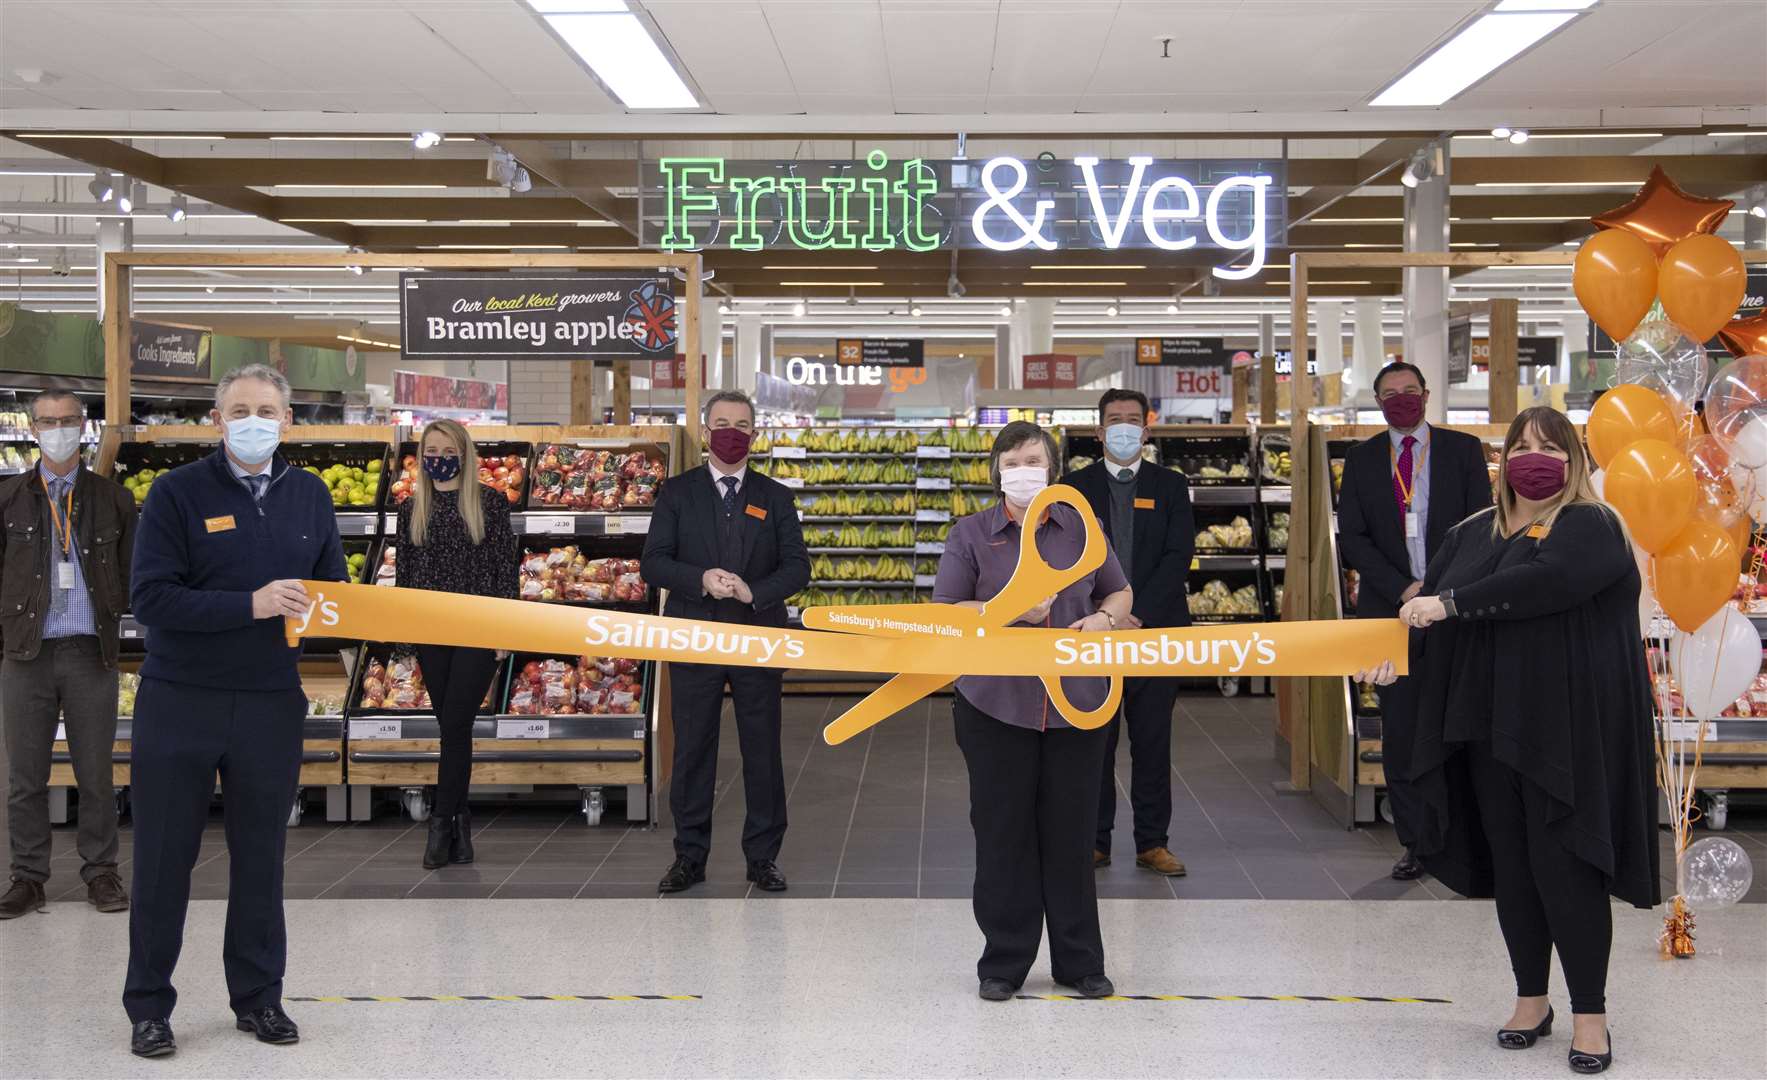 Sainsbury's has reopened its doors after a multi-million pound investment at its Hempstead Valley supermarket. Picture: Jason Alden